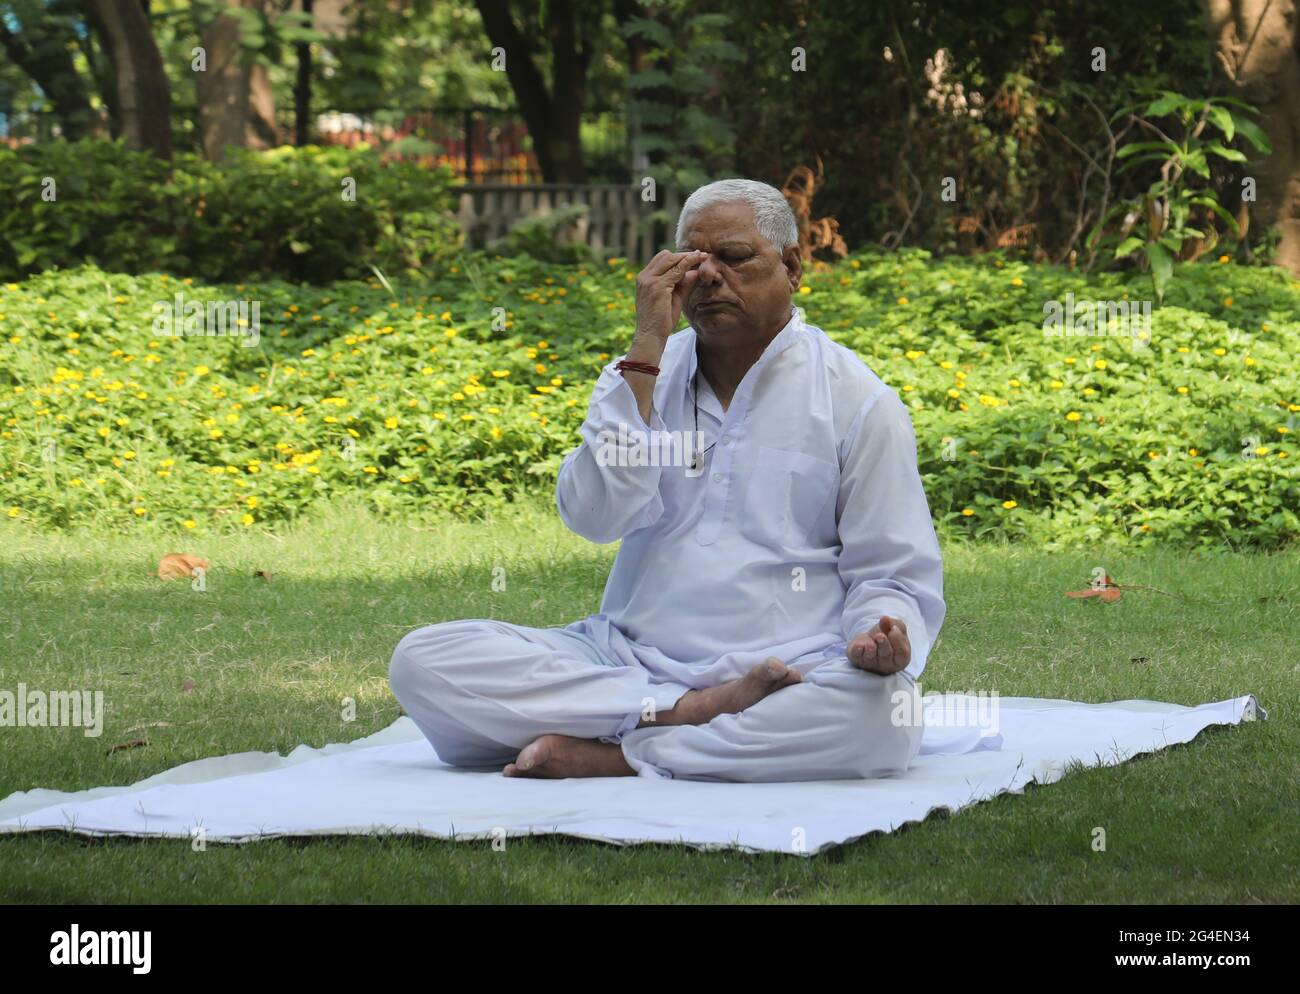 New Delhi, India. 21st June, 2021. An Indian old man performs Deep Breathing  exercise (Pranayama), to mark the International Yoga Day during the  coronavirus pandemic at the District Park.Yoga Day is celebrated